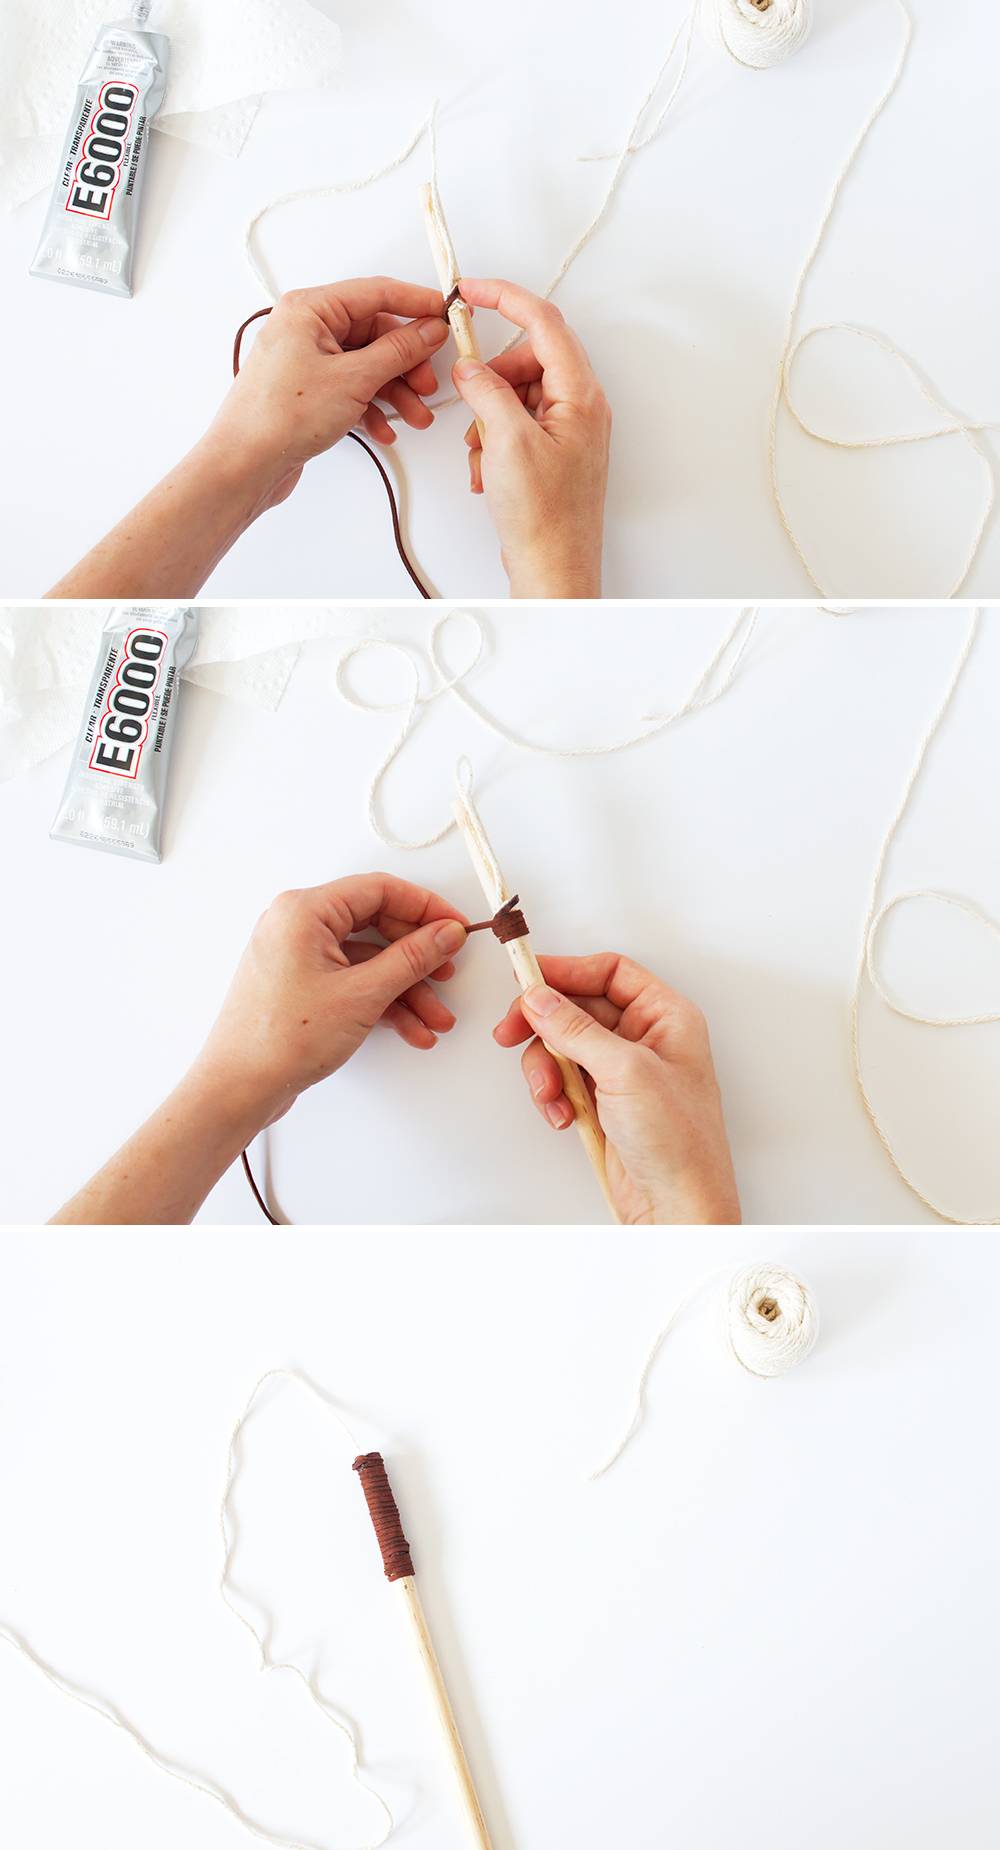 How to make a DIY cat wand toy